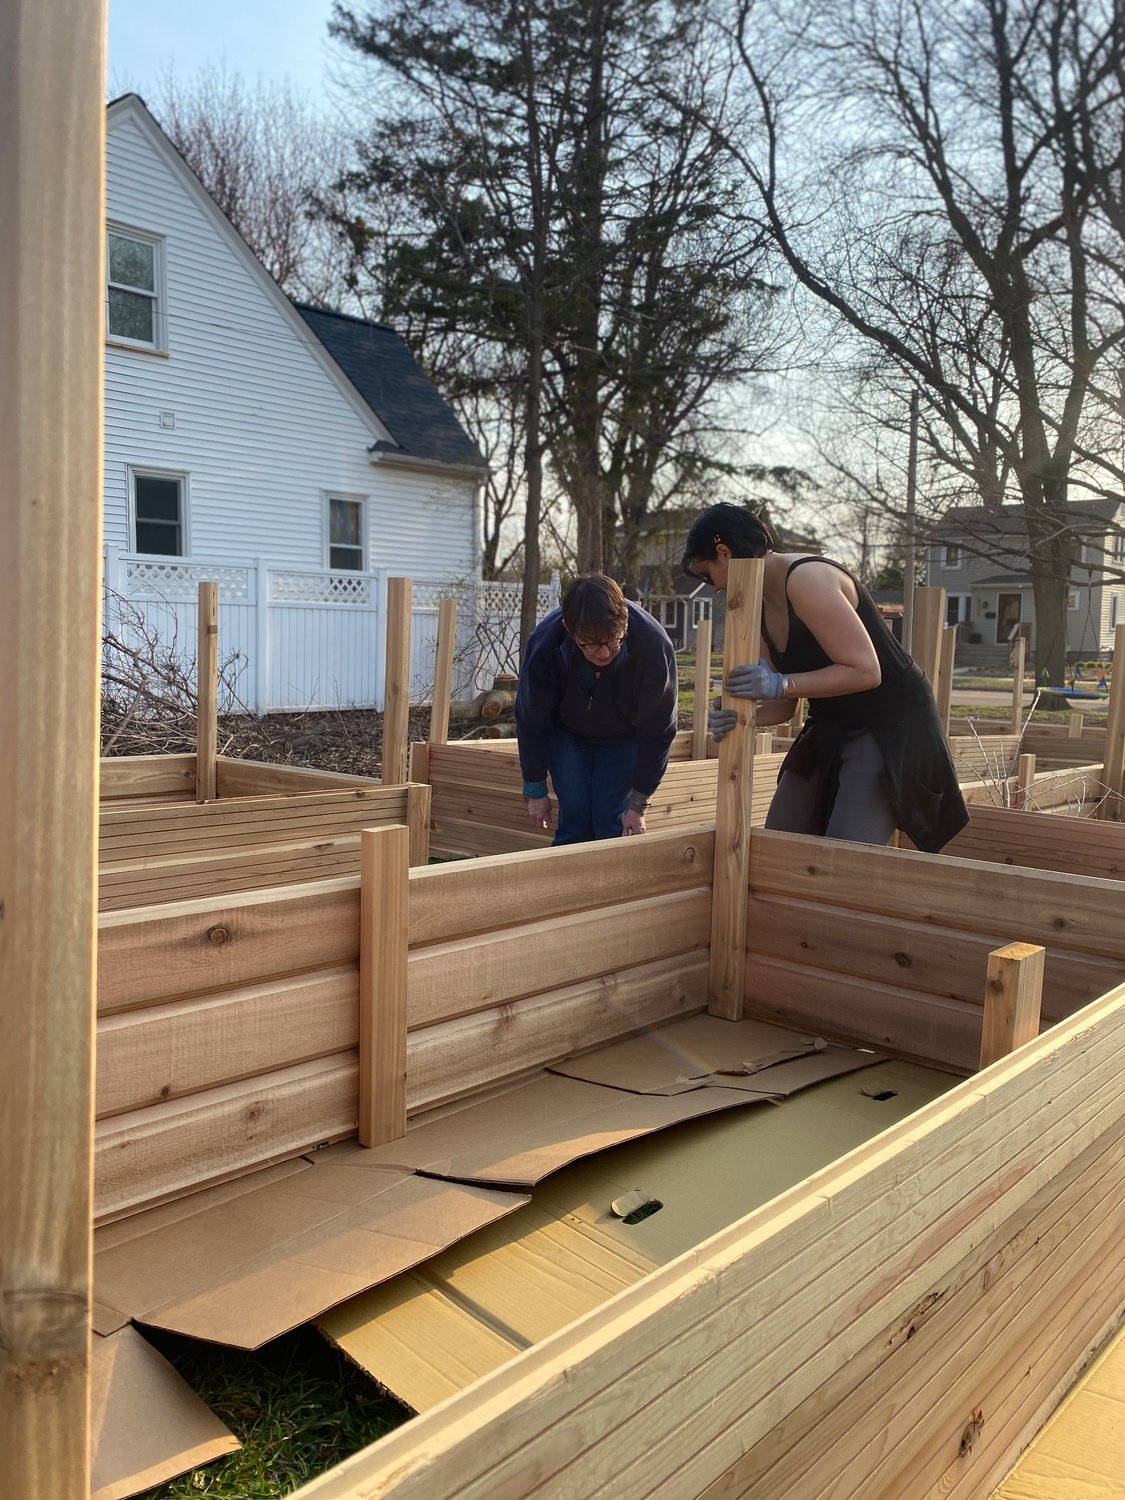 Volunteers build raised garden beds at the Giving Garden at Trinity Lutheran Church. Food grown will be donated to a food shelf.